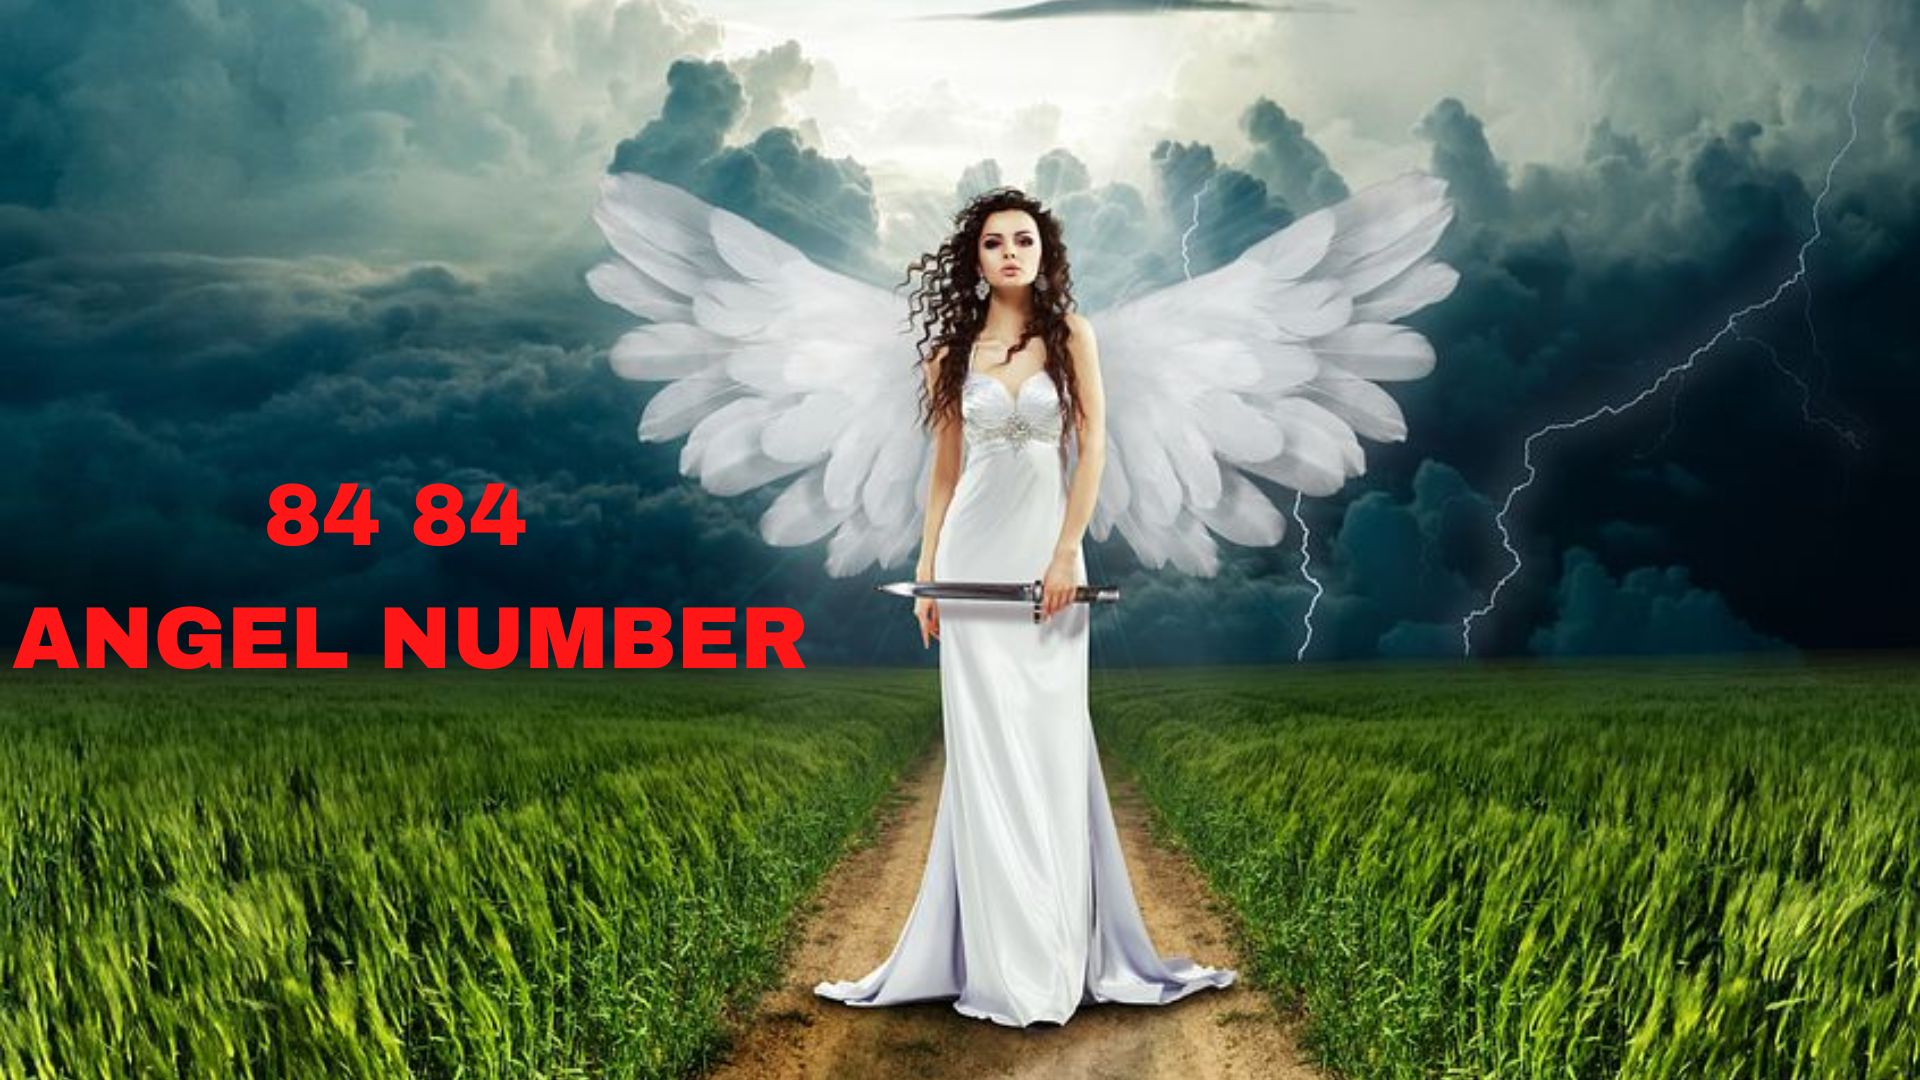 84 84 Angel Number Meaning In Terms Of Relationship And Money